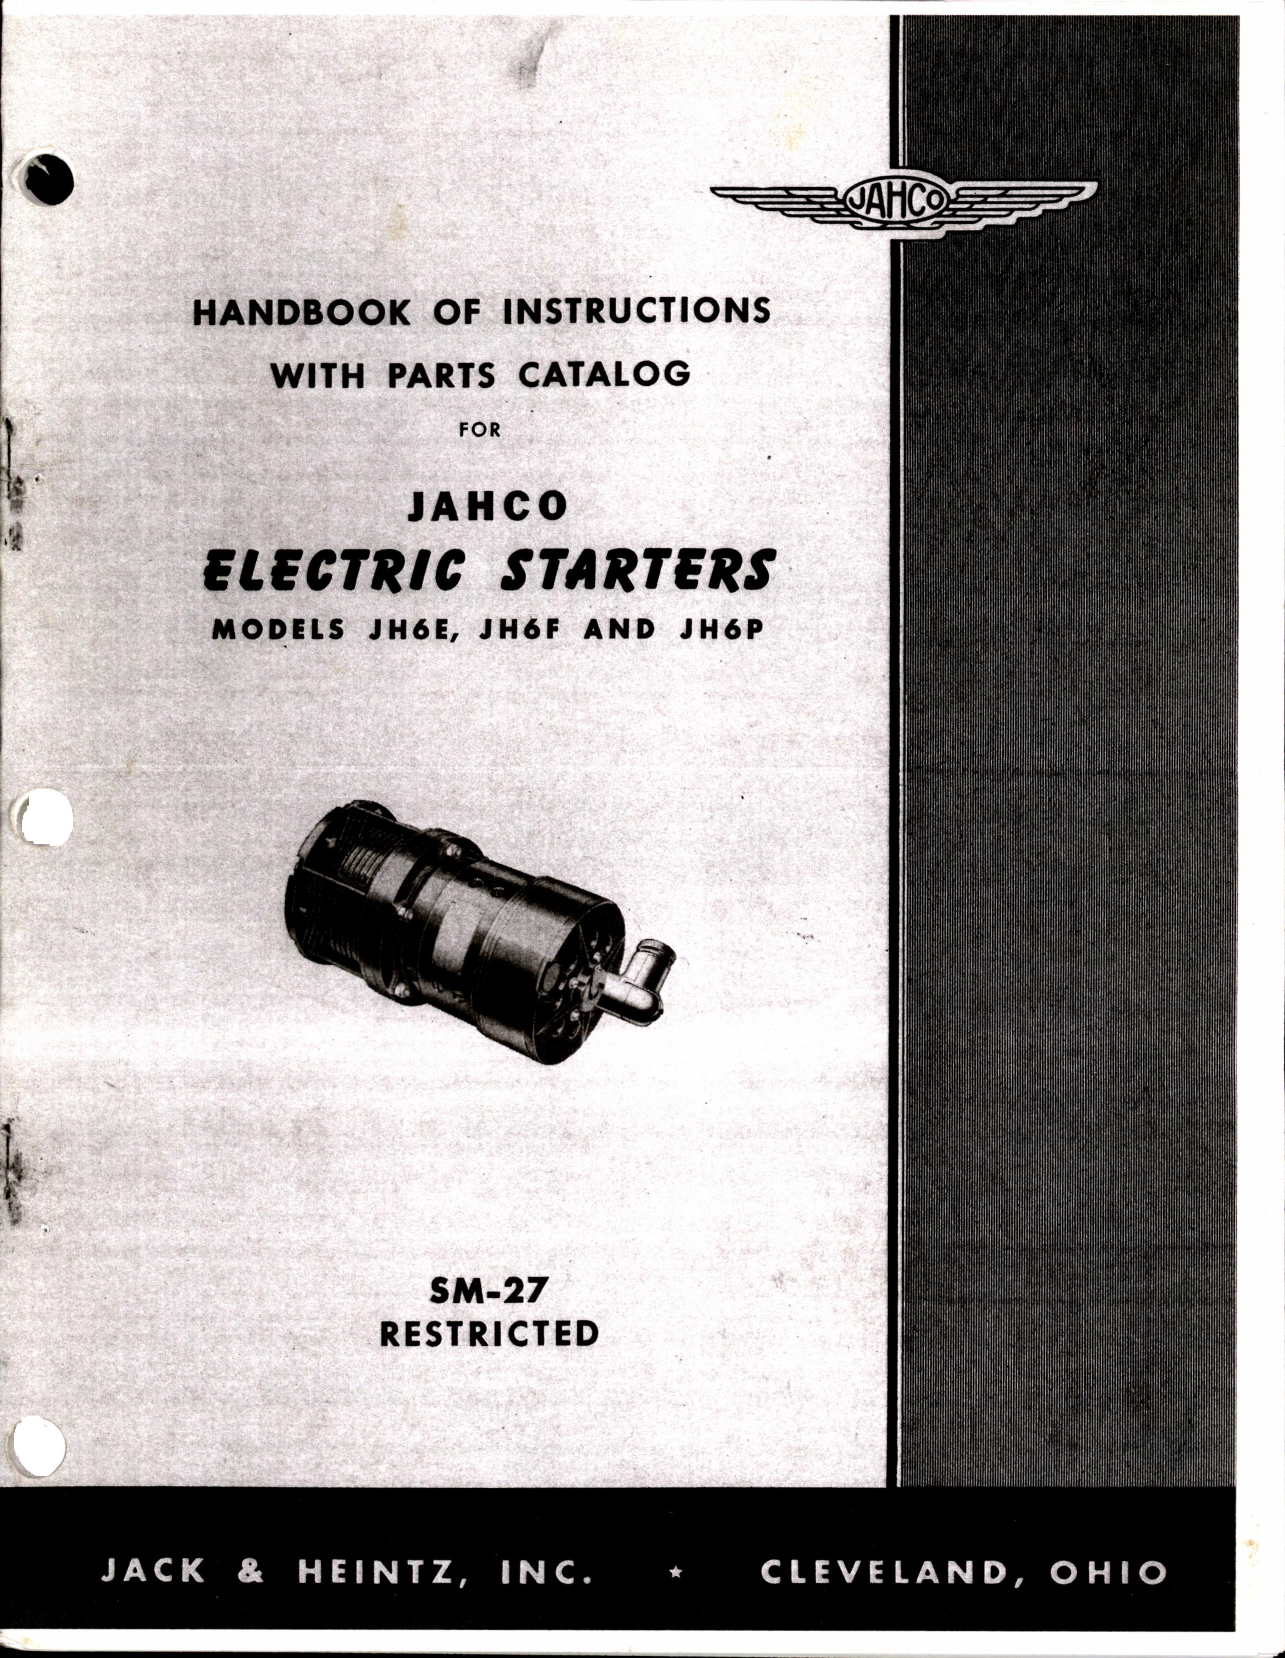 Sample page 1 from AirCorps Library document: Handbook of Instructions with Parts Catalog for Jahco Electric Starters Models JH6E, JH6F, and JH6P